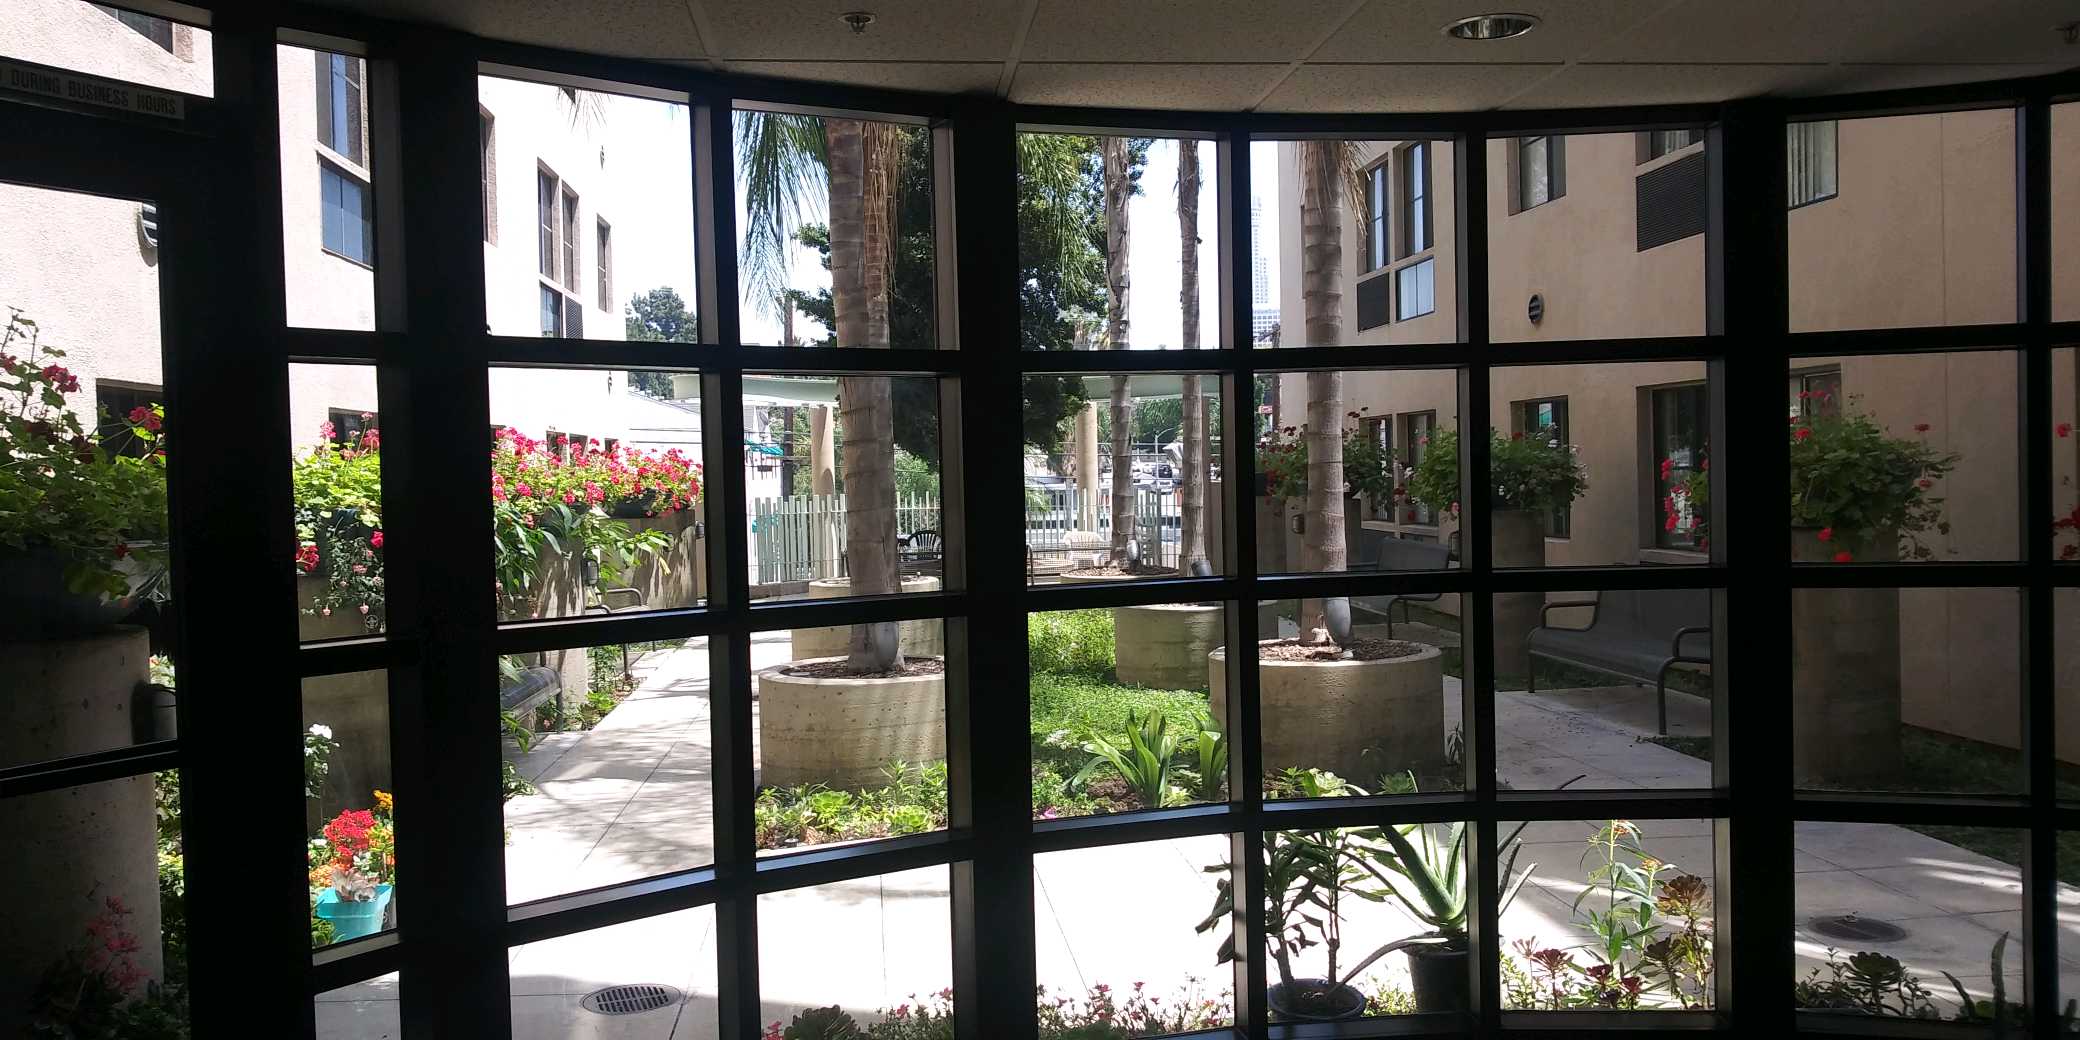 View of courtyard from inside building window. In the center are six large evenly spaced palm trees in planters with side walk access on either side. Park bench seating throughout courtyard. Flower planters along building